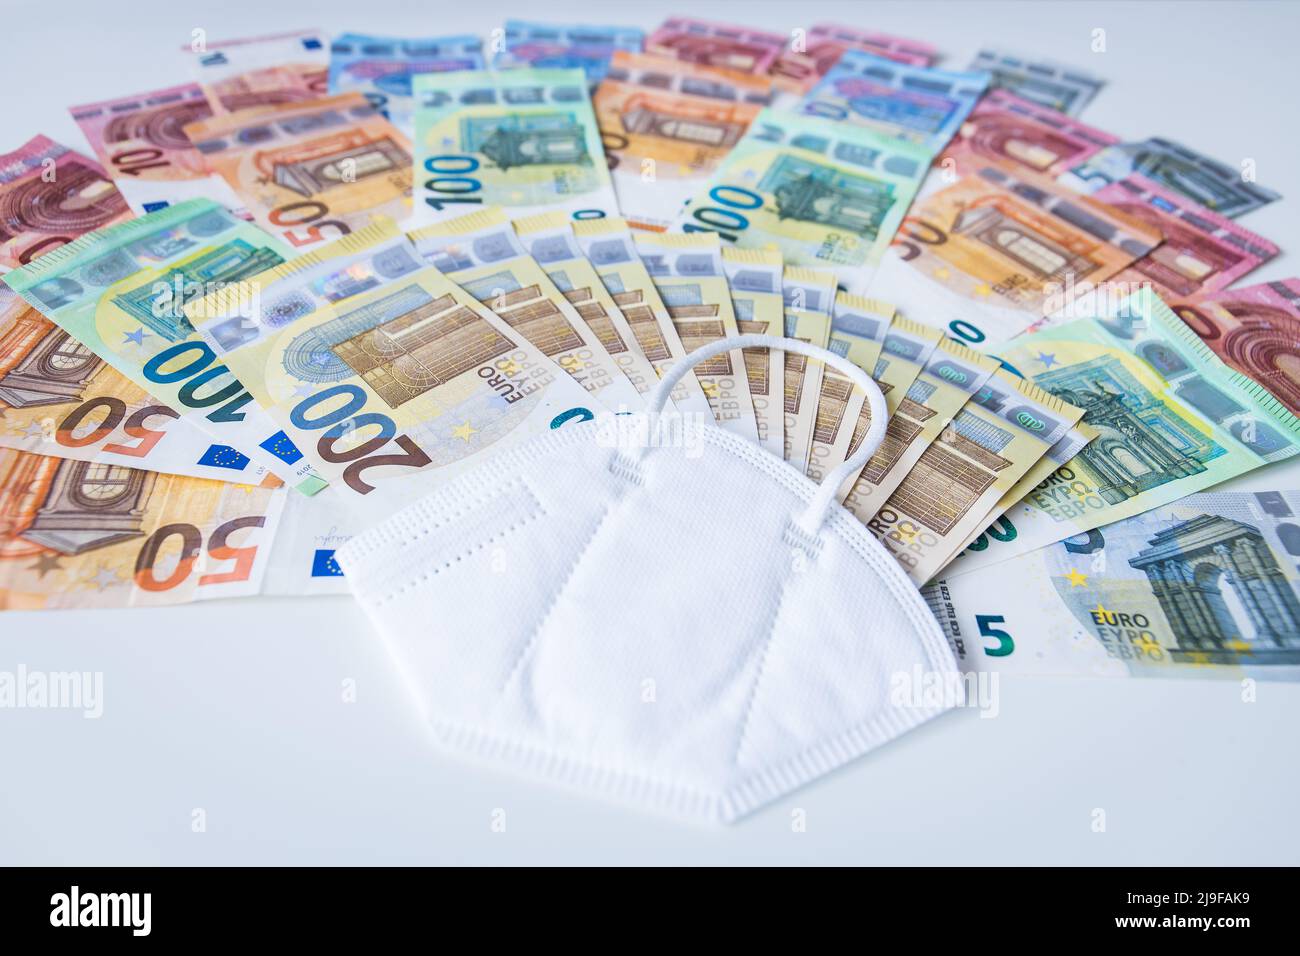 Corona face mask with a bundle of Euro banknotes Stock Photo